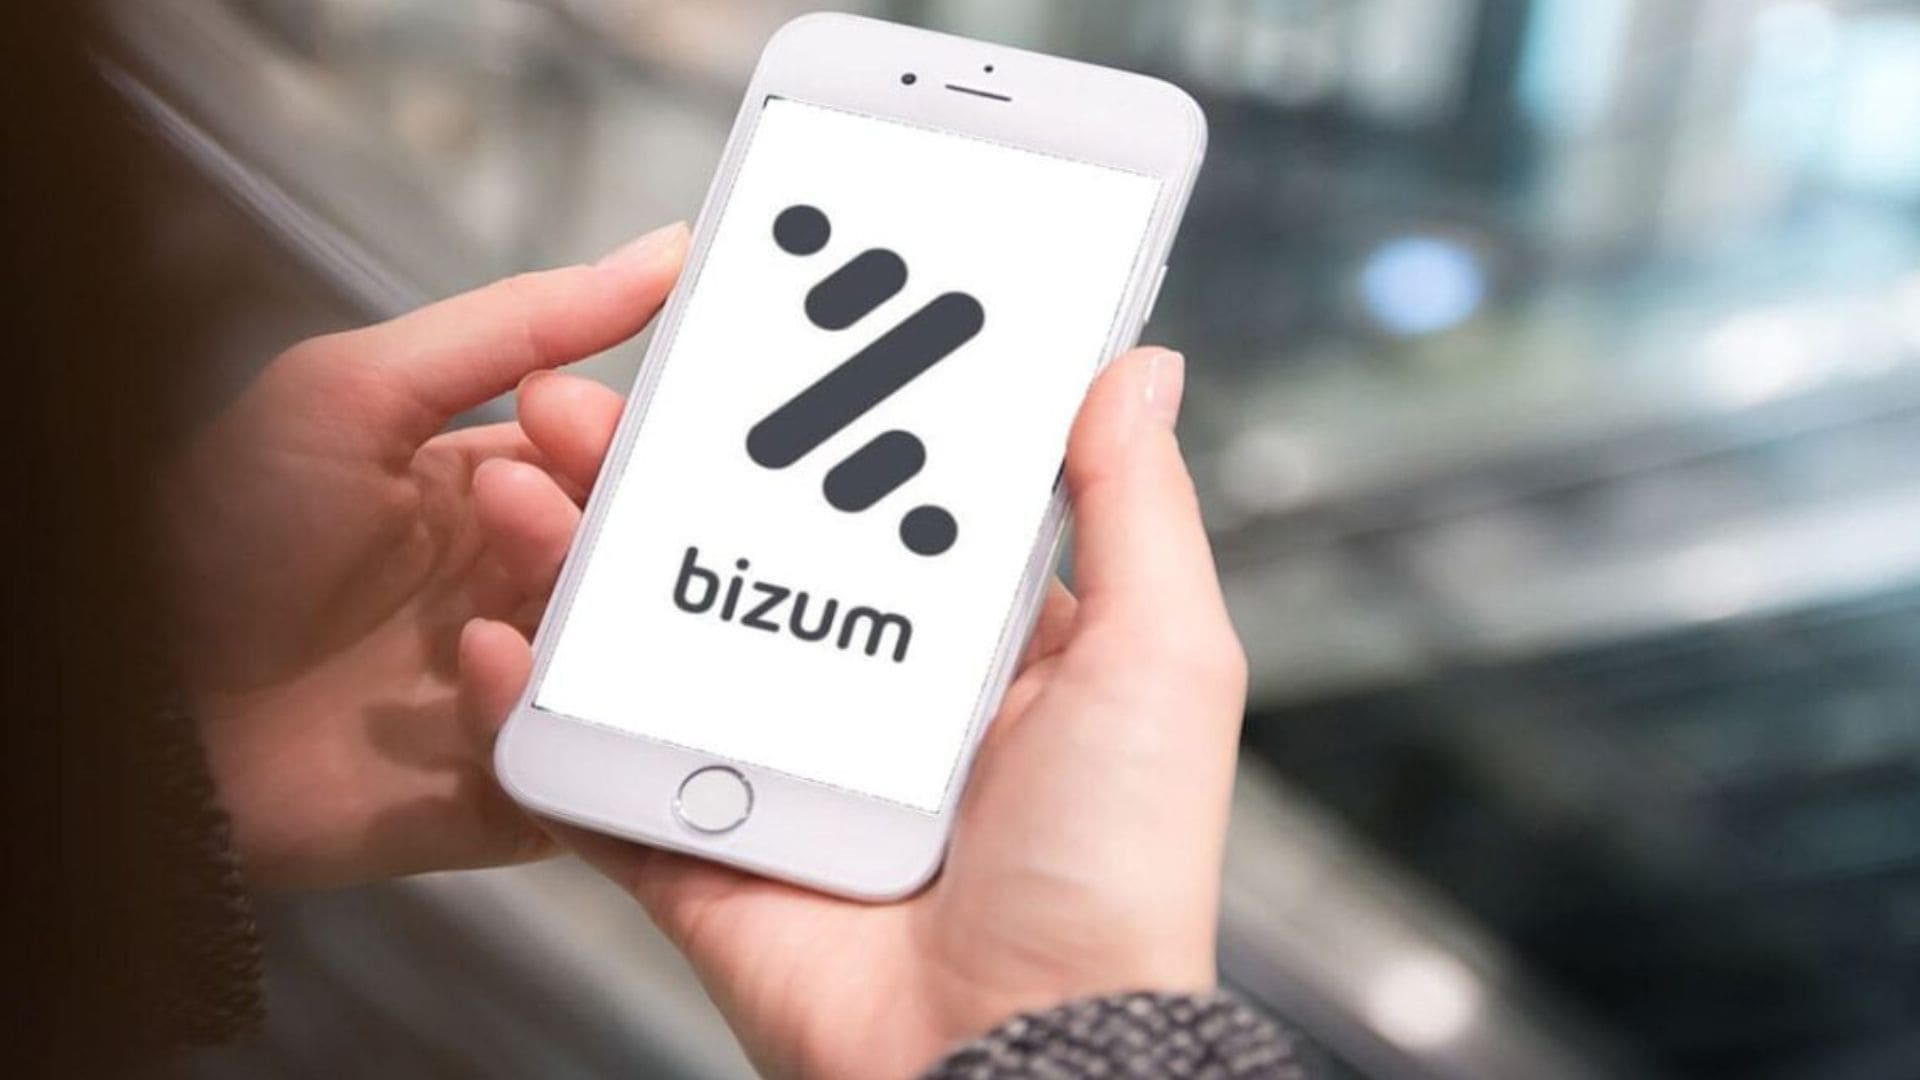 Bizum has its own limits on the amount of money that can be sent